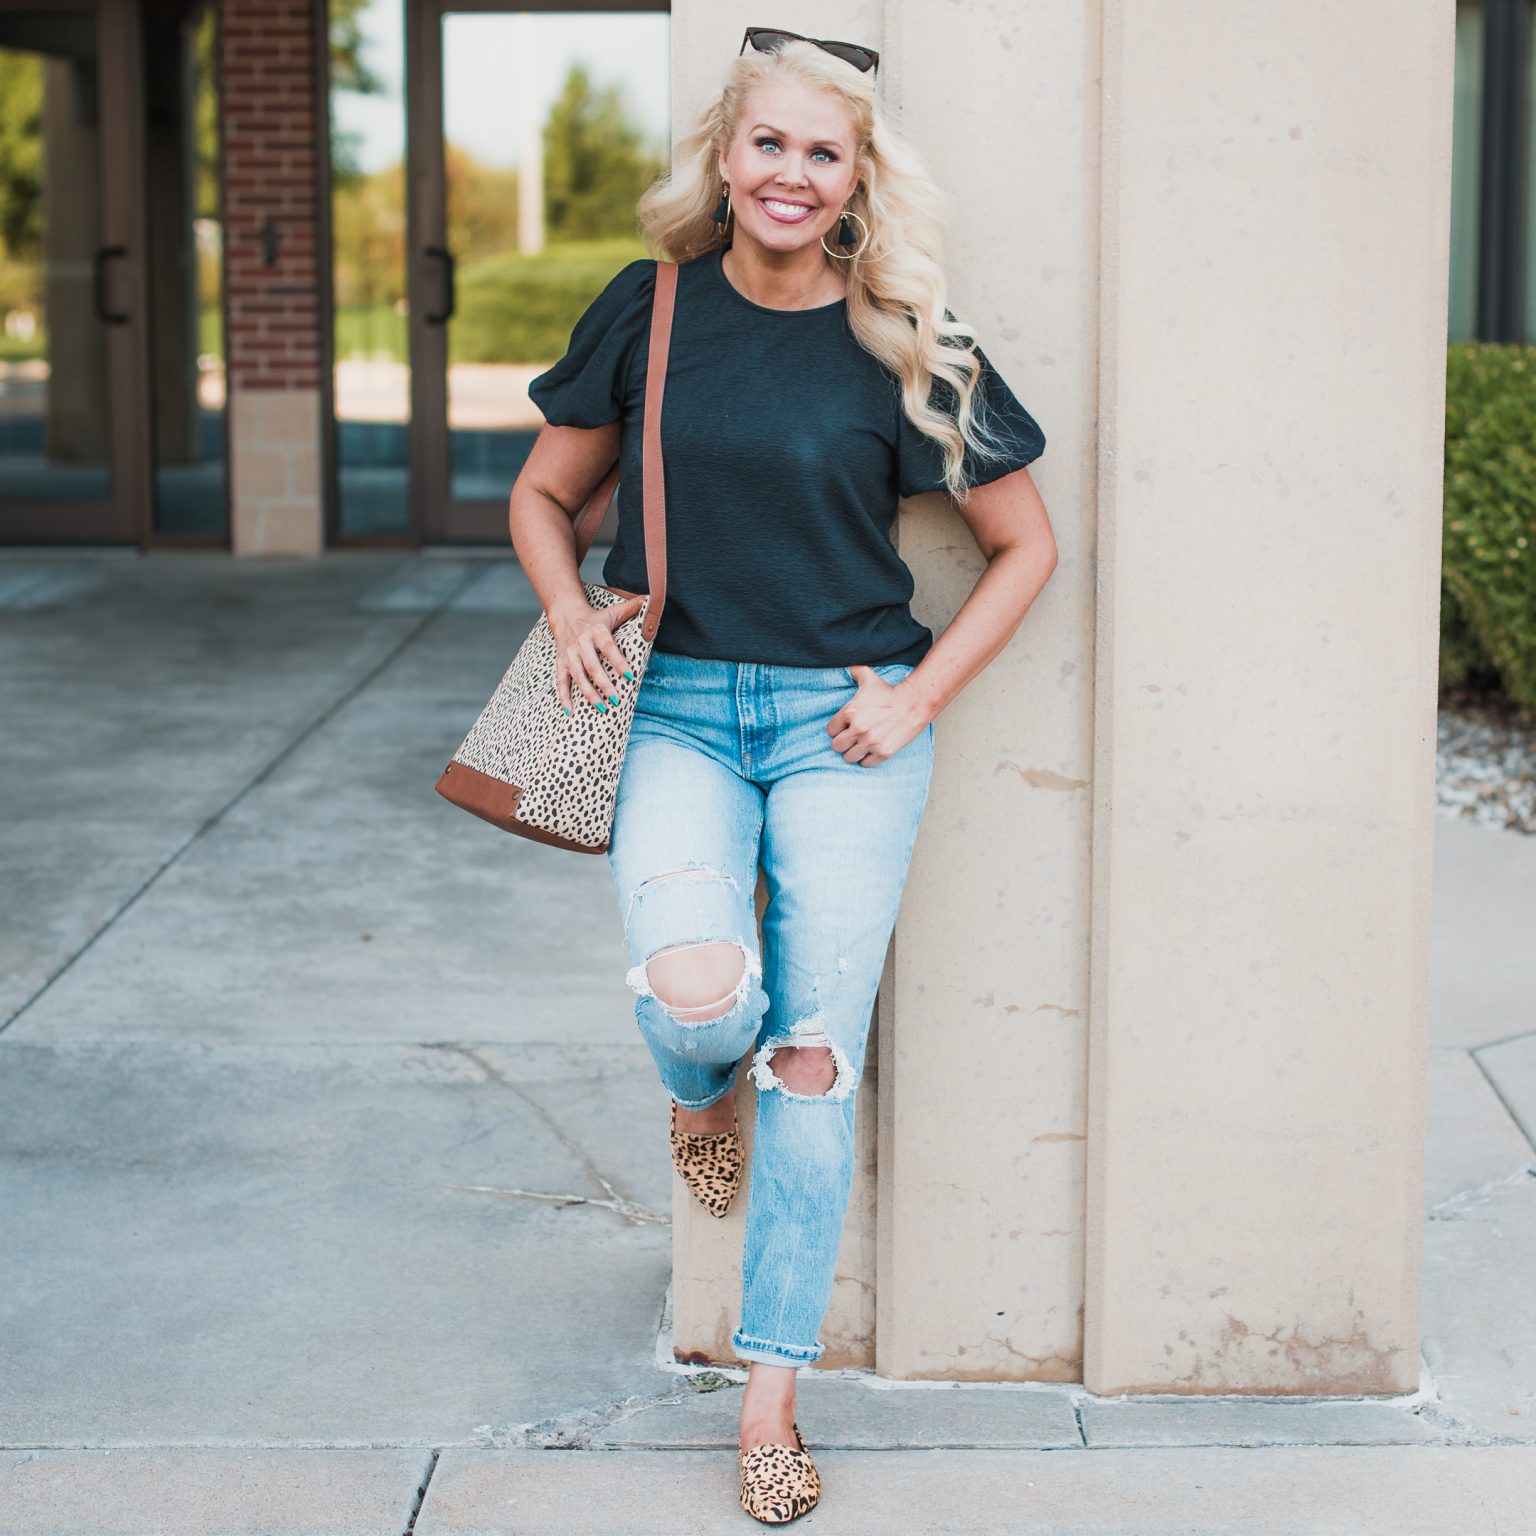 Over 40 Target Fall Fashion - Daily Dose of Style